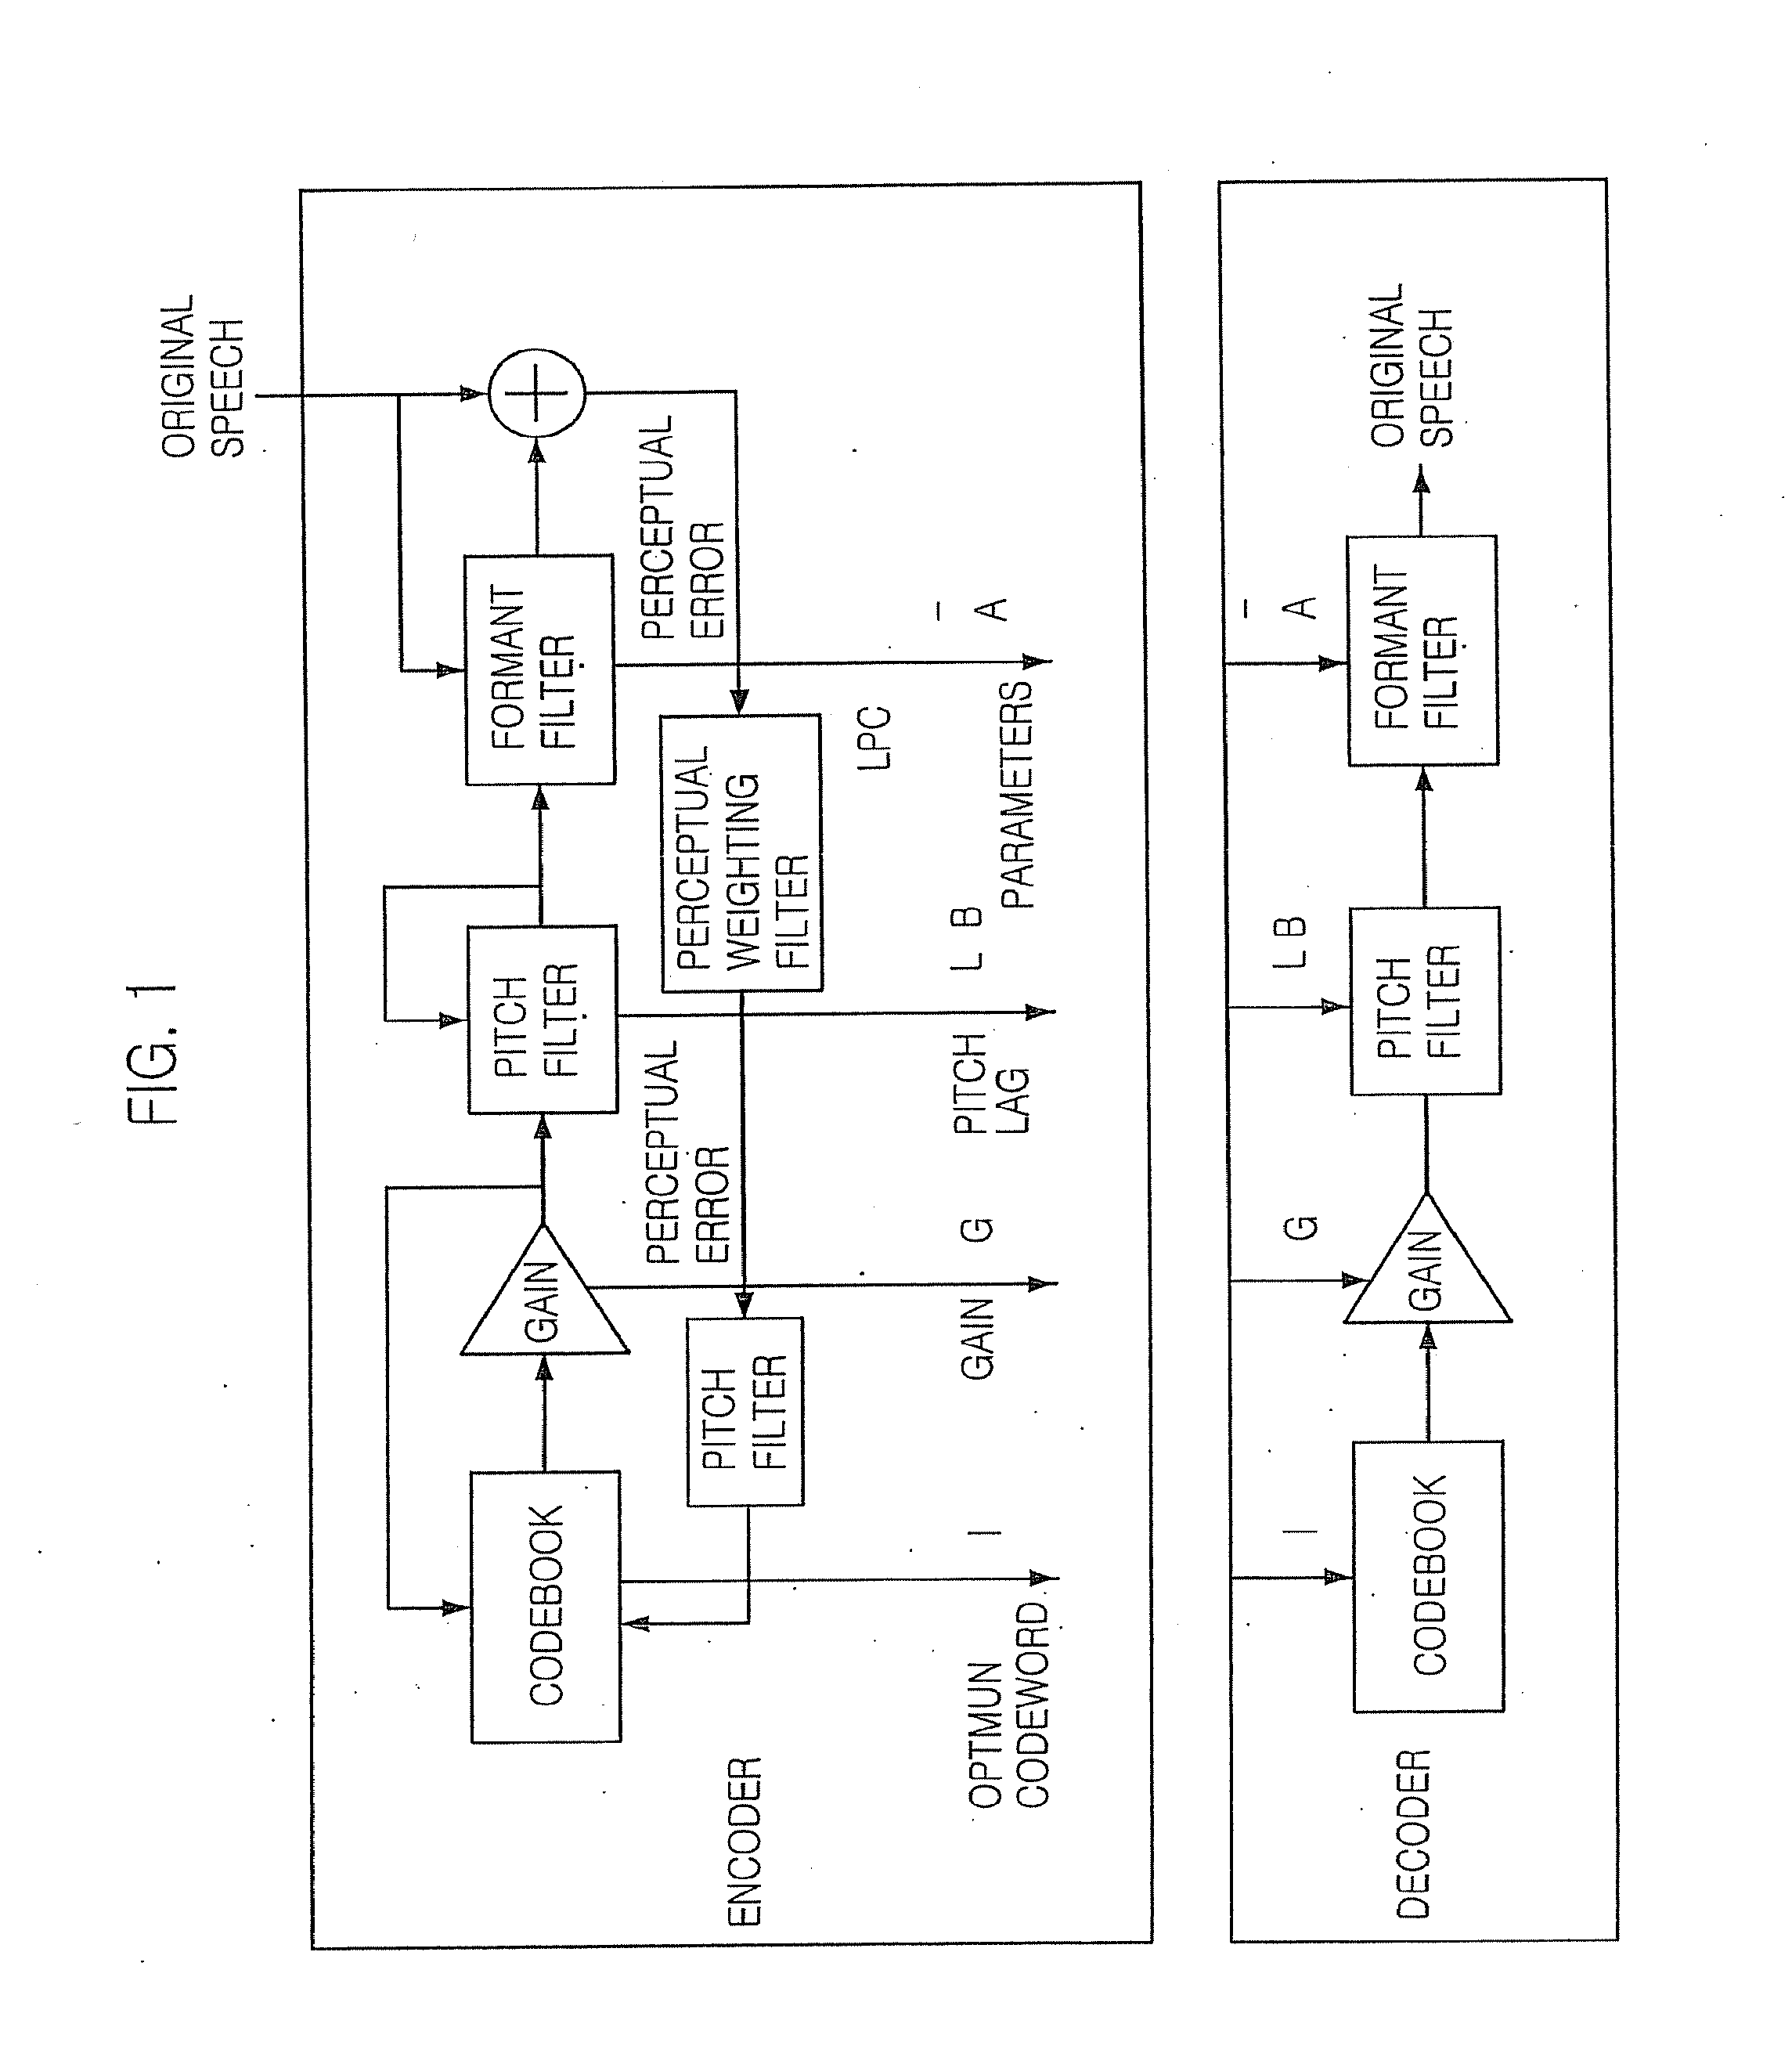 Method for manufacturing a semiconductor package